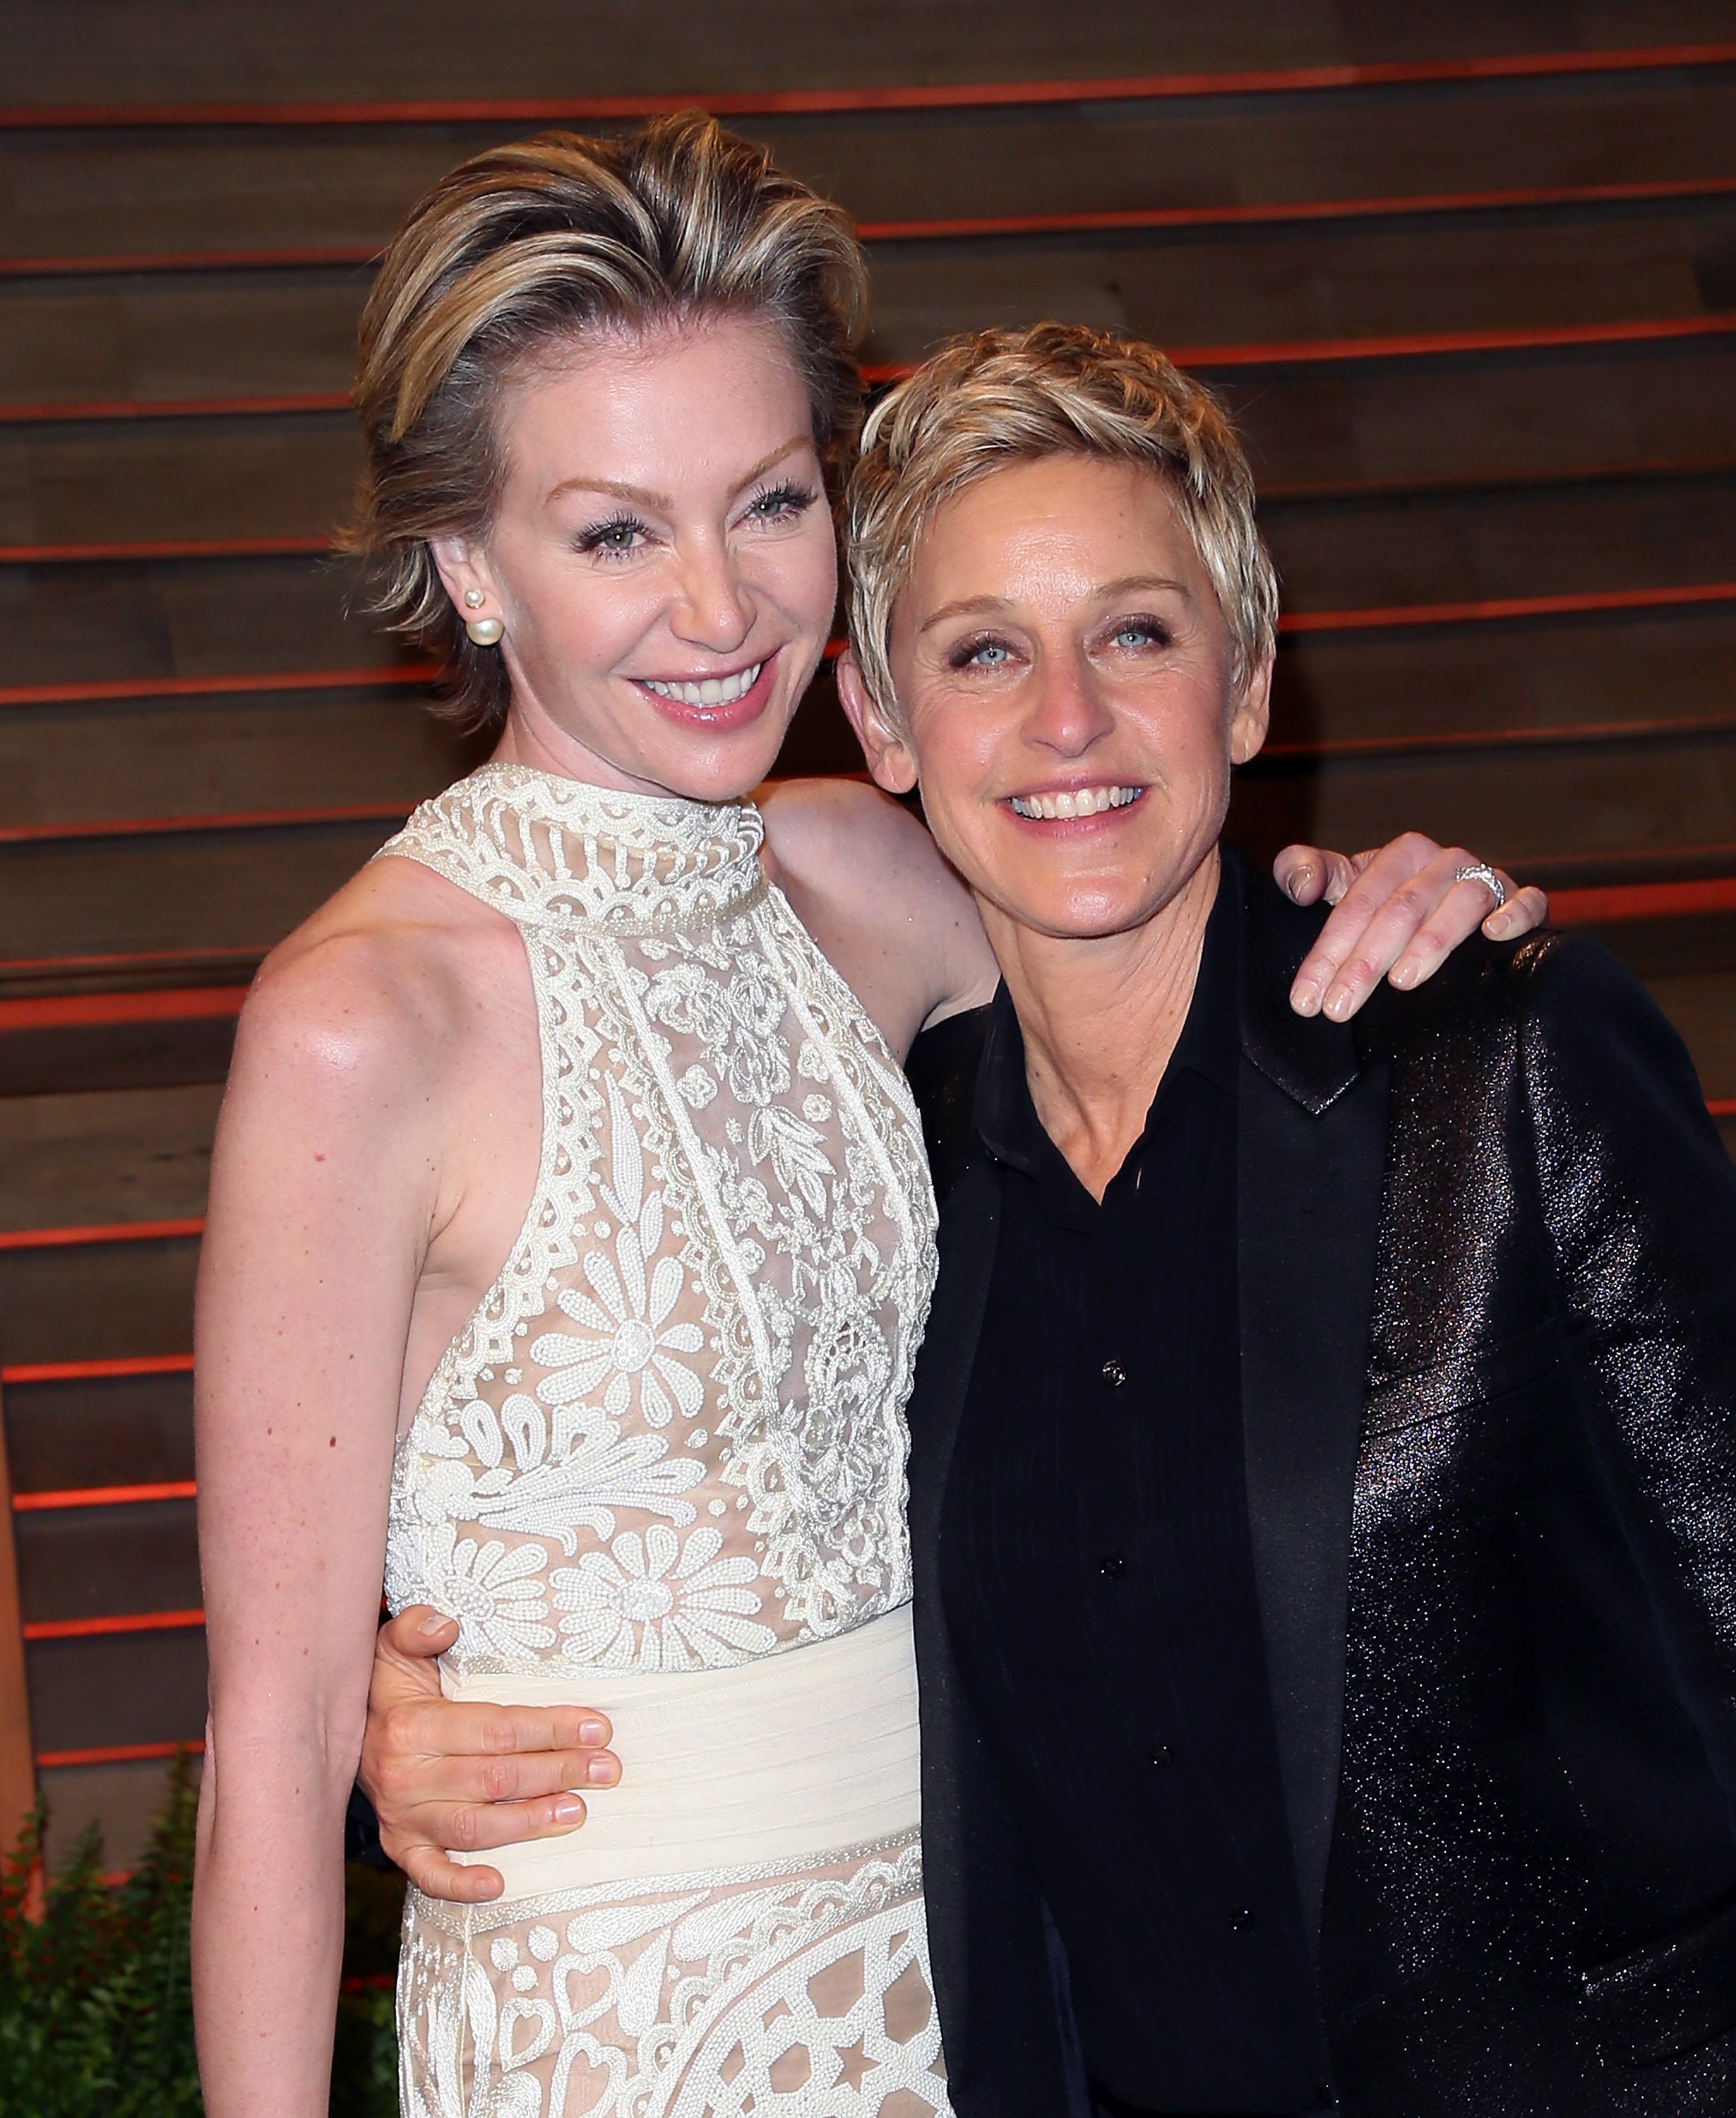 Ellen DeGeneres (R) and spouse actress Portia de Rossi attend the 2014 Vanity Fair Oscar Party hosted by Graydon Carter on March 2, 2014, in West Hollywood, California. | Source: Getty Images.